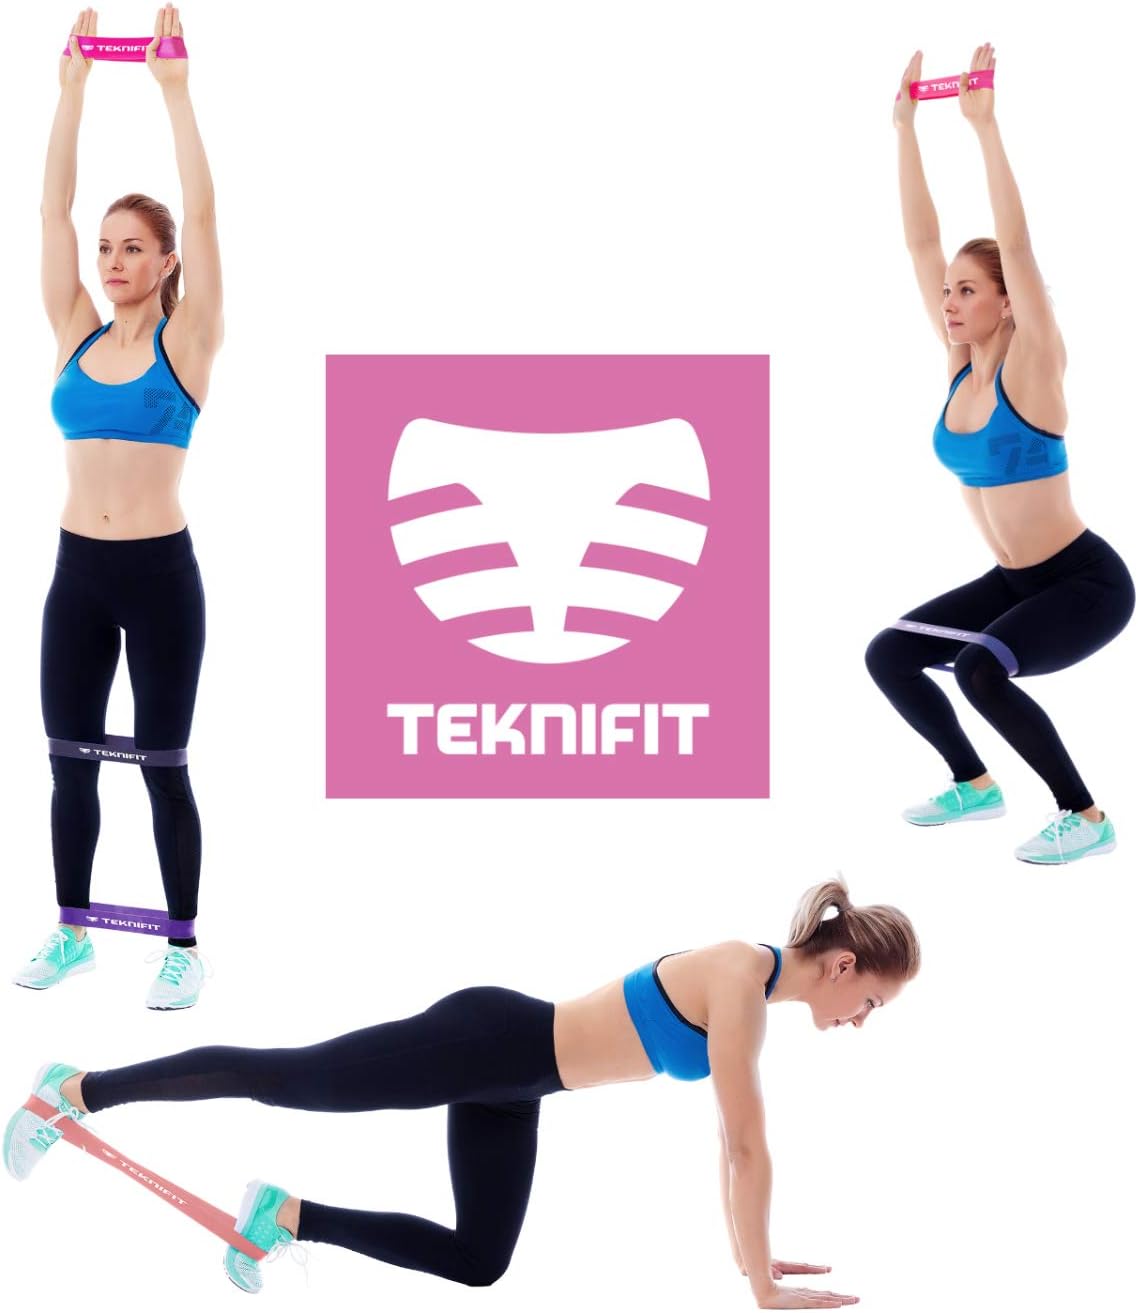 Teknifit Exercise Band Set Pink - 4 Resistance Band Levels for Complete Home Fitness, Full Body Workouts - Includes Carry Case and Download Guide